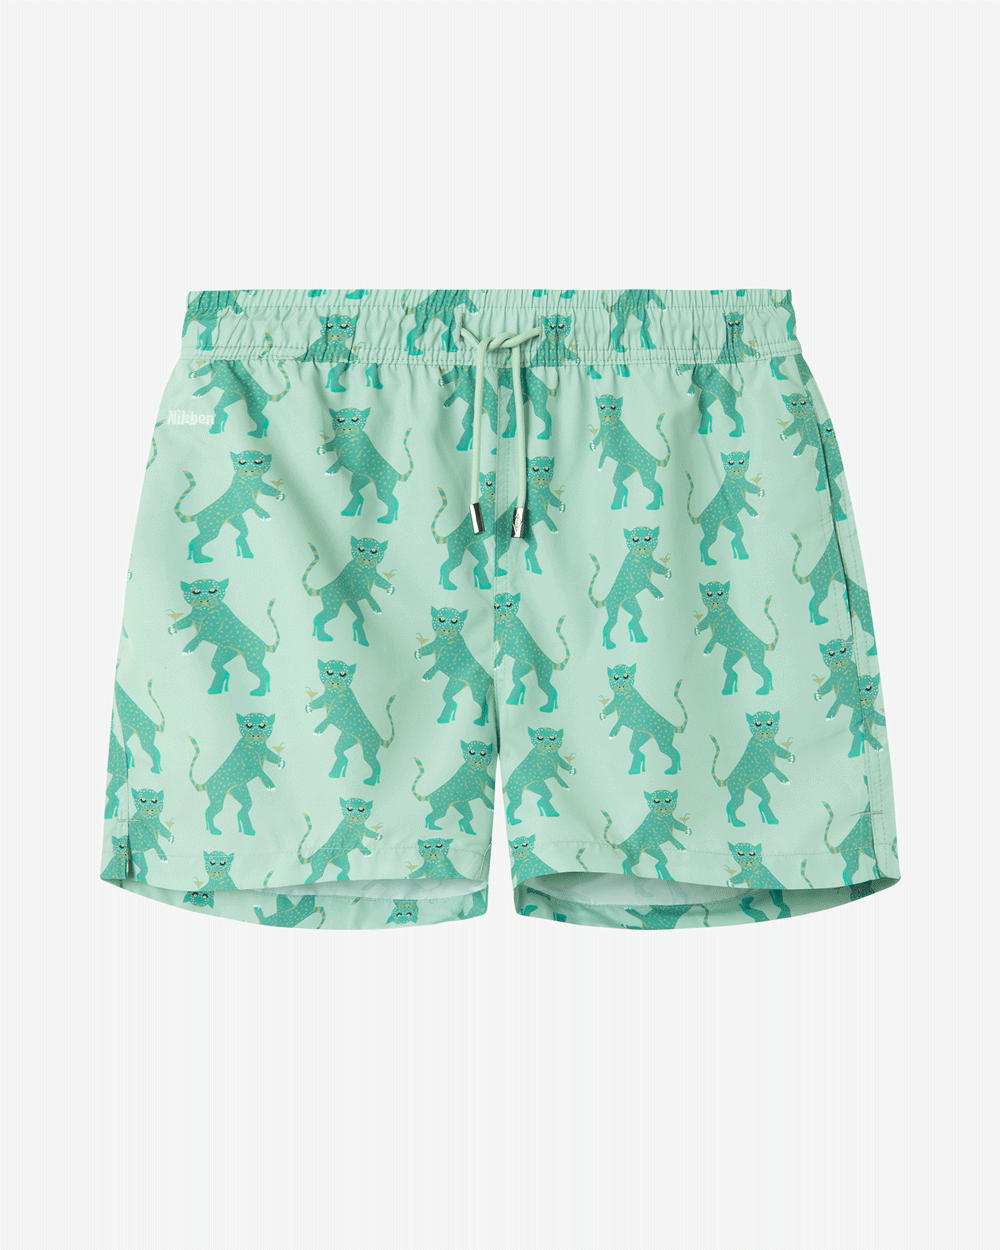 Green swim trunks with tiger print. Mid length with drawstring and two side pockets.